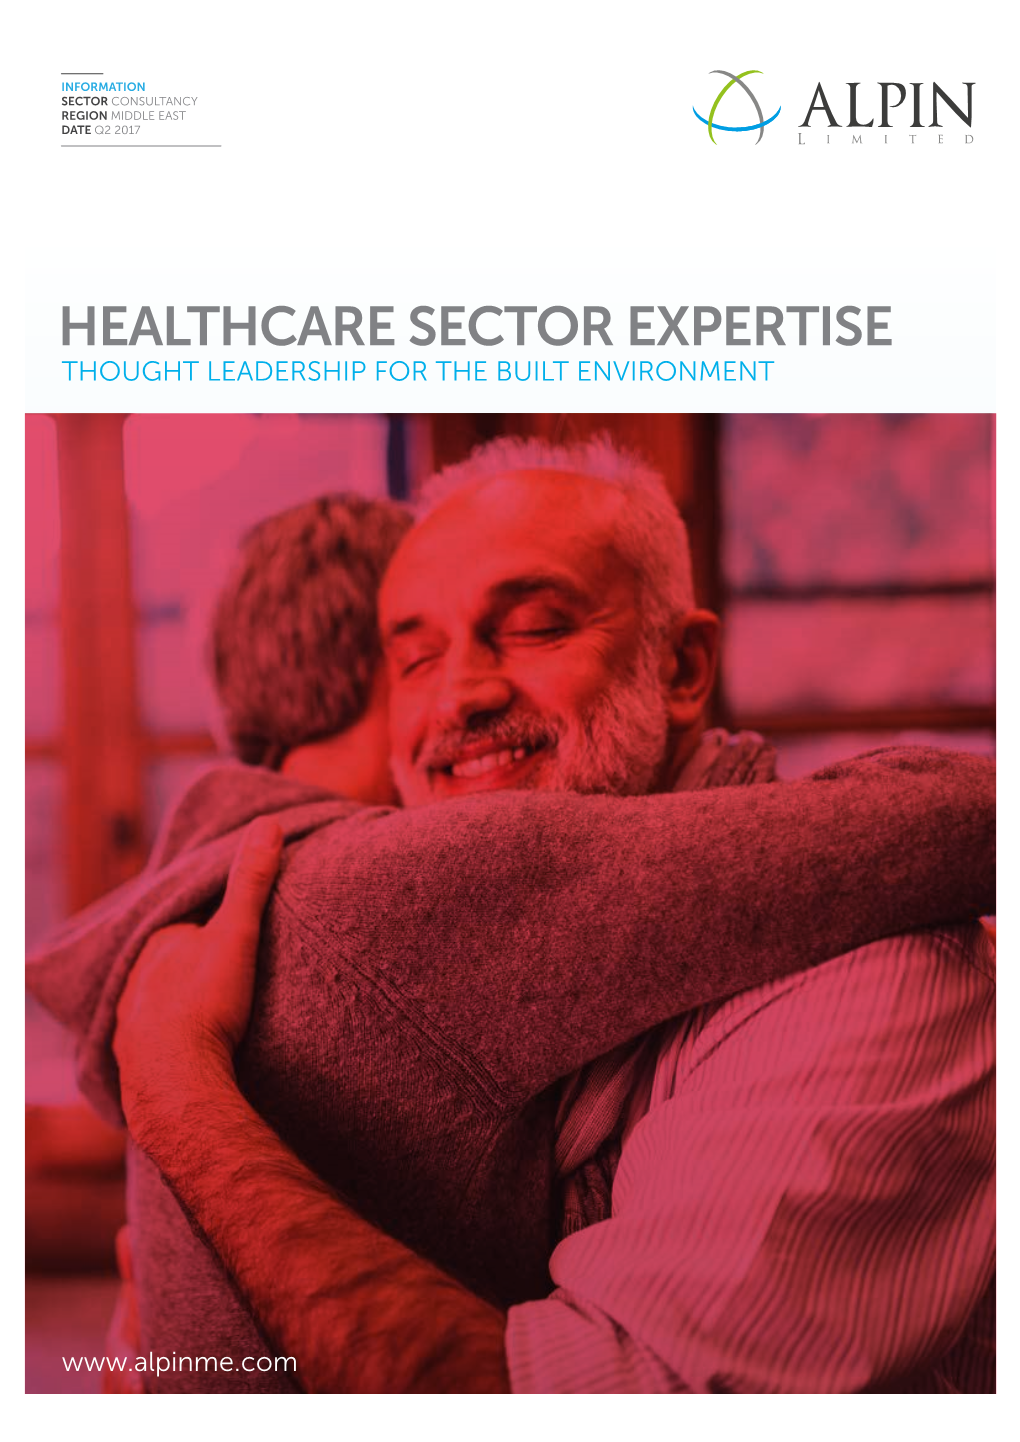 Healthcare Sector Expertise Thought Leadership for the Built Environment